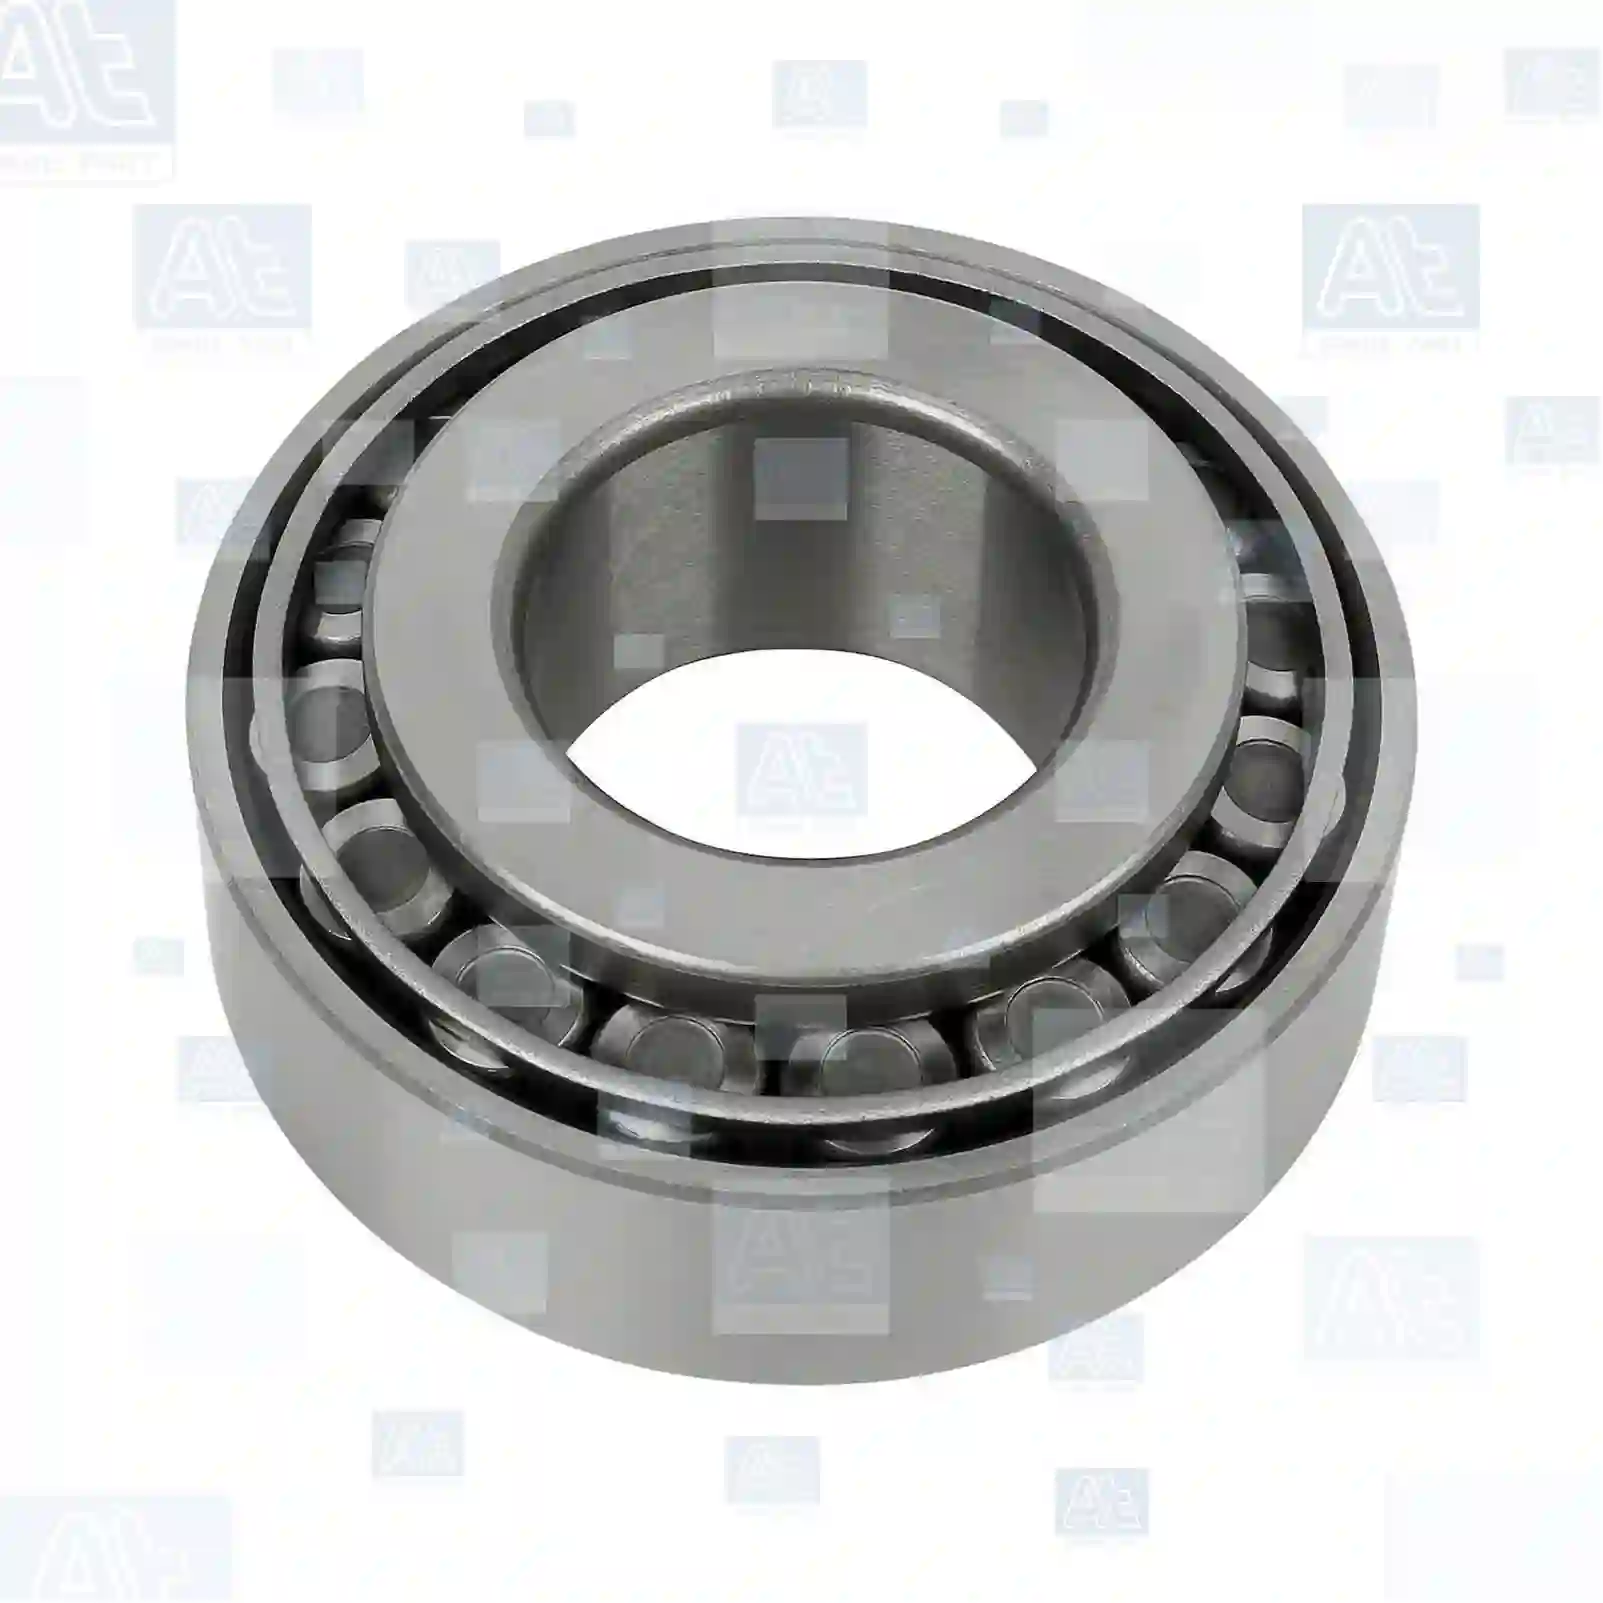 Tapered roller bearing, at no 77725196, oem no: 0264064500, 0140896, 0283684, 0283686, 140896, 283684, 283686, 0001442408X1, 000237070, 1442408, 1442408X1, 01110018, 01110019, 01110018, 01110019, 1110019, 26800590, 3612964500, 06324903100, 06324990013, 06324990133, 34934200003, 81934206051, 84934200023, A0023432848, A0857596000, 0049811305, MS556585, 0773230900, 0857596000, 0959532309, 3660704500, 4200003100, 1110018, 1362149, 14623, 397314, 6691168000, 11064, 1194652, ZG02977-0008 At Spare Part | Engine, Accelerator Pedal, Camshaft, Connecting Rod, Crankcase, Crankshaft, Cylinder Head, Engine Suspension Mountings, Exhaust Manifold, Exhaust Gas Recirculation, Filter Kits, Flywheel Housing, General Overhaul Kits, Engine, Intake Manifold, Oil Cleaner, Oil Cooler, Oil Filter, Oil Pump, Oil Sump, Piston & Liner, Sensor & Switch, Timing Case, Turbocharger, Cooling System, Belt Tensioner, Coolant Filter, Coolant Pipe, Corrosion Prevention Agent, Drive, Expansion Tank, Fan, Intercooler, Monitors & Gauges, Radiator, Thermostat, V-Belt / Timing belt, Water Pump, Fuel System, Electronical Injector Unit, Feed Pump, Fuel Filter, cpl., Fuel Gauge Sender,  Fuel Line, Fuel Pump, Fuel Tank, Injection Line Kit, Injection Pump, Exhaust System, Clutch & Pedal, Gearbox, Propeller Shaft, Axles, Brake System, Hubs & Wheels, Suspension, Leaf Spring, Universal Parts / Accessories, Steering, Electrical System, Cabin Tapered roller bearing, at no 77725196, oem no: 0264064500, 0140896, 0283684, 0283686, 140896, 283684, 283686, 0001442408X1, 000237070, 1442408, 1442408X1, 01110018, 01110019, 01110018, 01110019, 1110019, 26800590, 3612964500, 06324903100, 06324990013, 06324990133, 34934200003, 81934206051, 84934200023, A0023432848, A0857596000, 0049811305, MS556585, 0773230900, 0857596000, 0959532309, 3660704500, 4200003100, 1110018, 1362149, 14623, 397314, 6691168000, 11064, 1194652, ZG02977-0008 At Spare Part | Engine, Accelerator Pedal, Camshaft, Connecting Rod, Crankcase, Crankshaft, Cylinder Head, Engine Suspension Mountings, Exhaust Manifold, Exhaust Gas Recirculation, Filter Kits, Flywheel Housing, General Overhaul Kits, Engine, Intake Manifold, Oil Cleaner, Oil Cooler, Oil Filter, Oil Pump, Oil Sump, Piston & Liner, Sensor & Switch, Timing Case, Turbocharger, Cooling System, Belt Tensioner, Coolant Filter, Coolant Pipe, Corrosion Prevention Agent, Drive, Expansion Tank, Fan, Intercooler, Monitors & Gauges, Radiator, Thermostat, V-Belt / Timing belt, Water Pump, Fuel System, Electronical Injector Unit, Feed Pump, Fuel Filter, cpl., Fuel Gauge Sender,  Fuel Line, Fuel Pump, Fuel Tank, Injection Line Kit, Injection Pump, Exhaust System, Clutch & Pedal, Gearbox, Propeller Shaft, Axles, Brake System, Hubs & Wheels, Suspension, Leaf Spring, Universal Parts / Accessories, Steering, Electrical System, Cabin